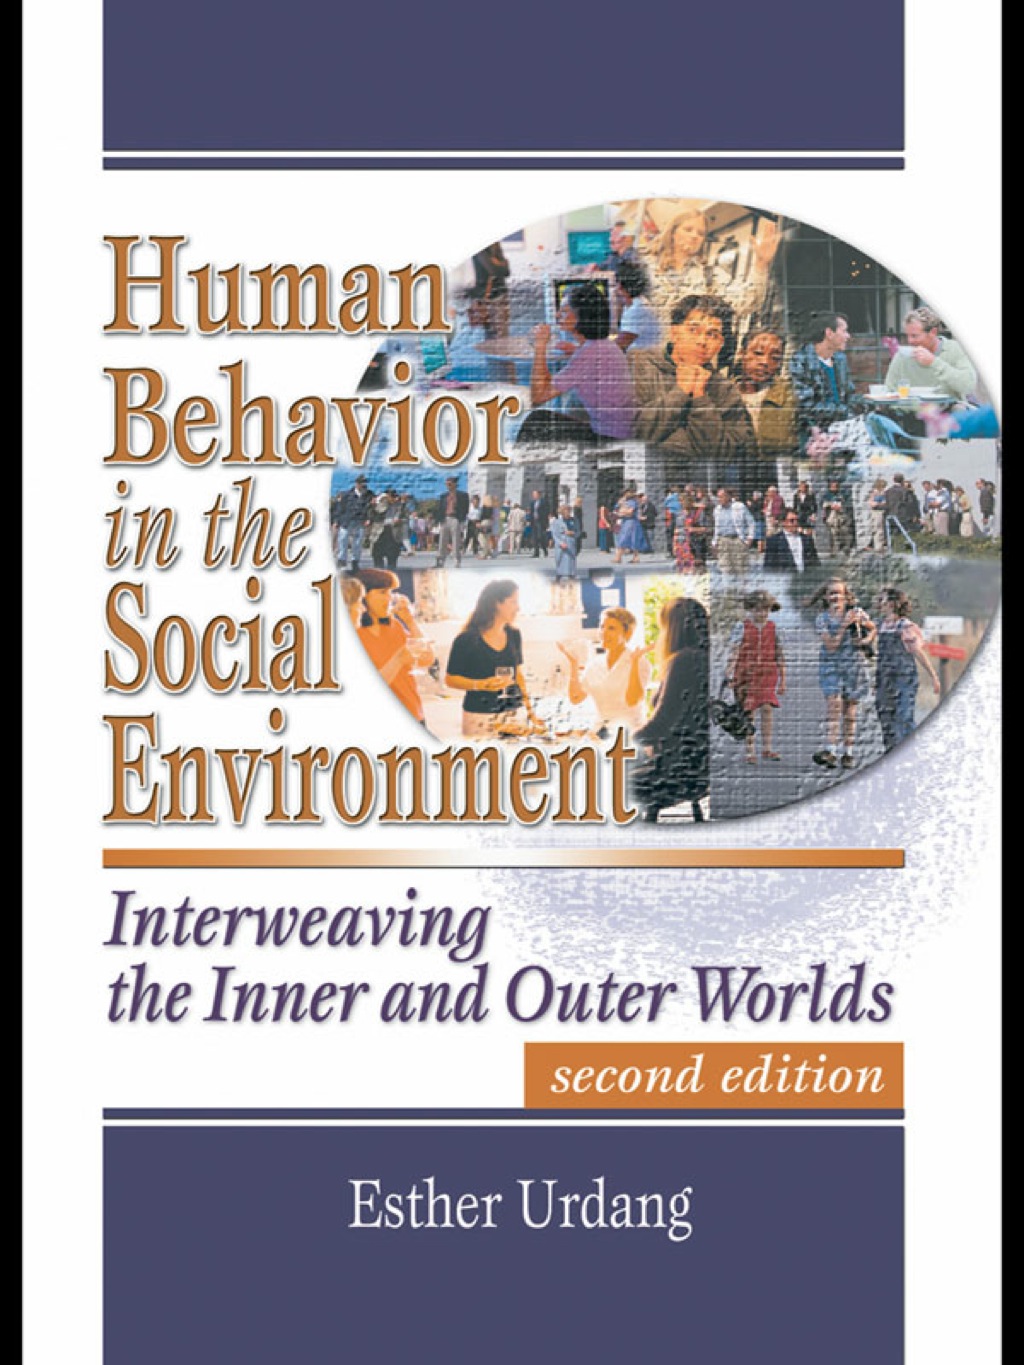 Human Behavior in the Social Environment: Interweaving the Inner and Outer Worlds (eBook) - Urdang,  Esther